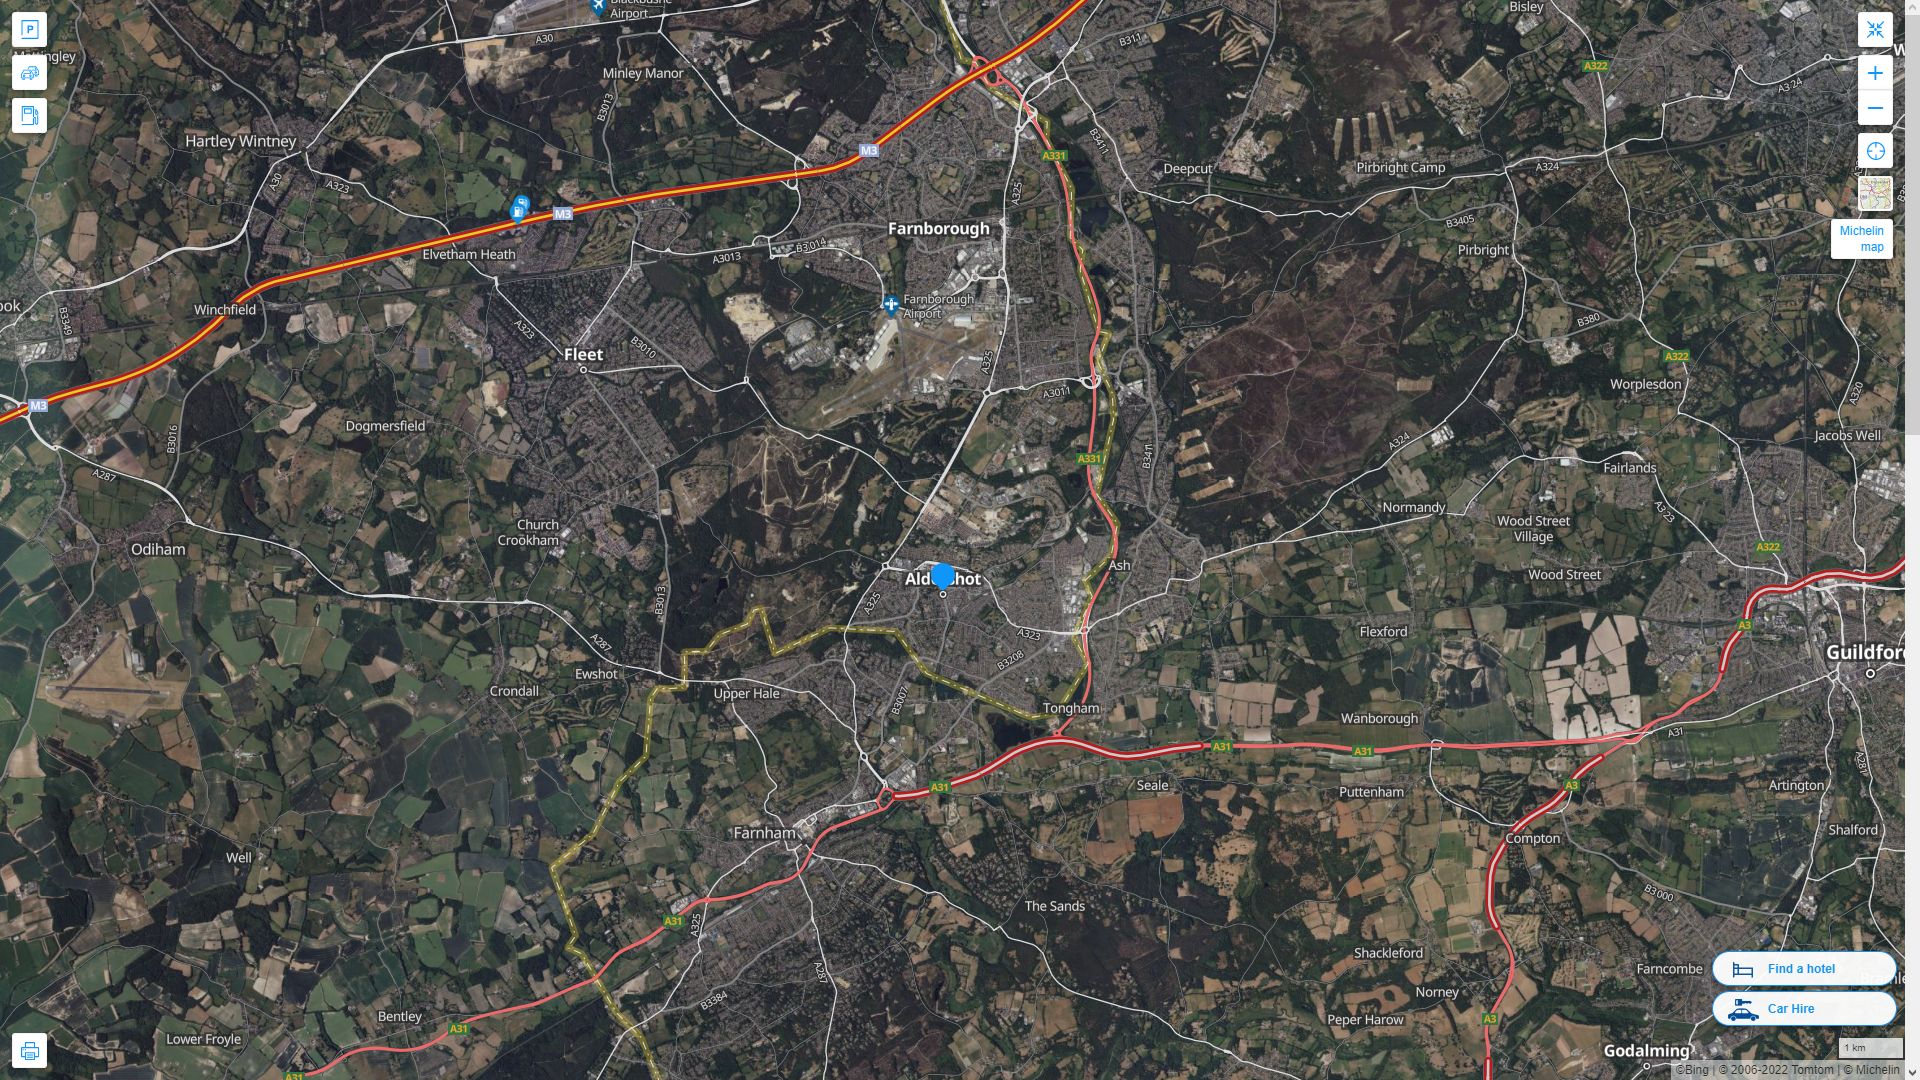 Aldershot Highway and Road Map with Satellite View